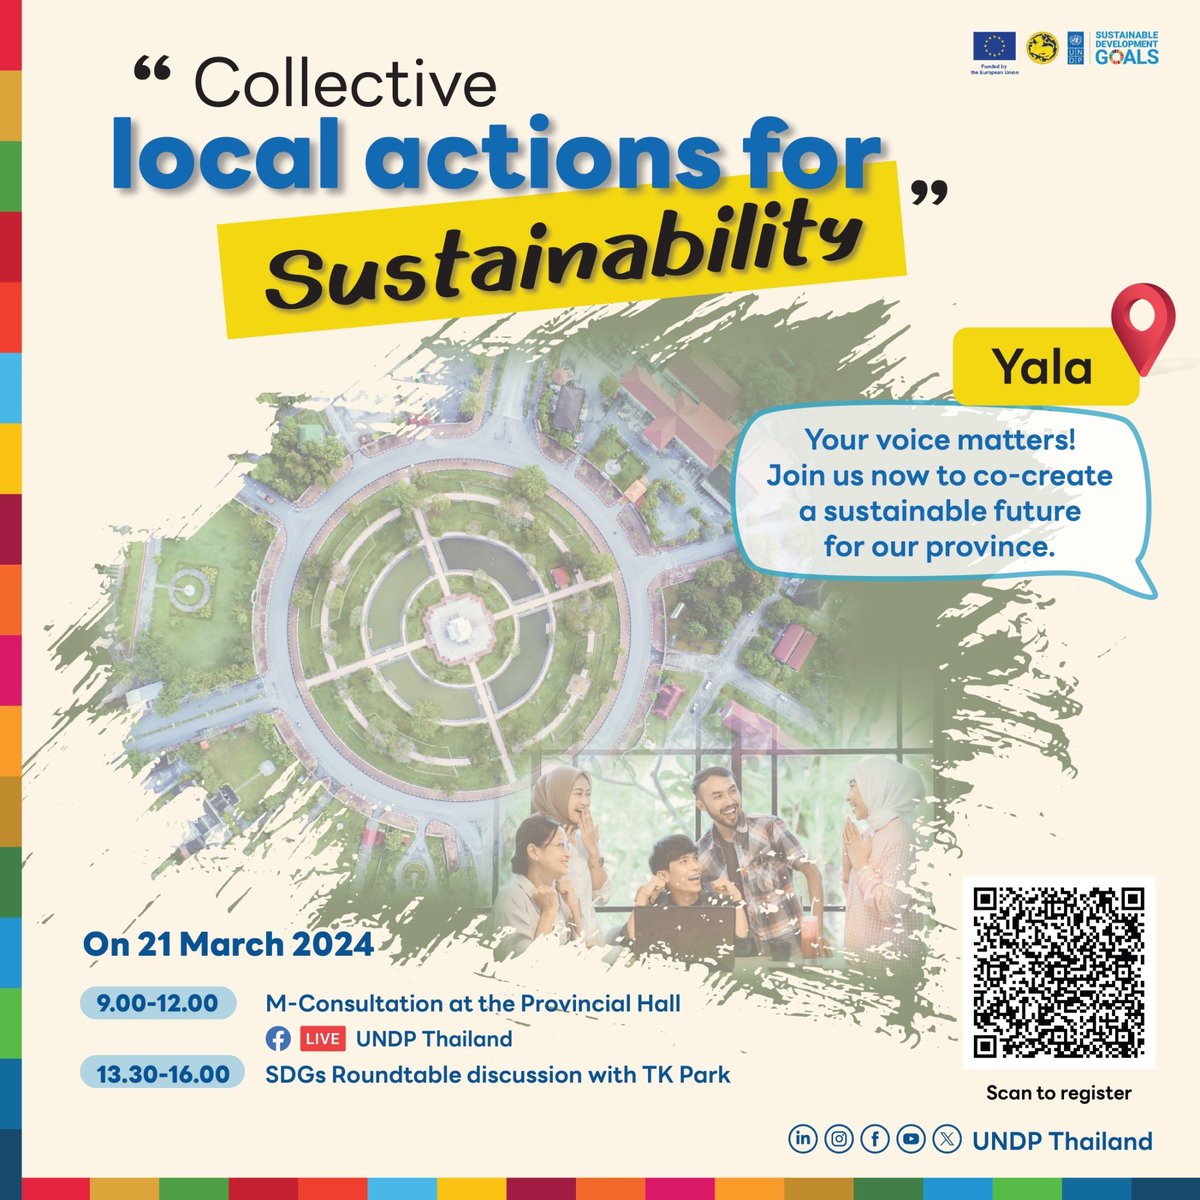 Today we are discussing with our partners in #Yala the initial findings of the #SDGAssessment facilitated by @UNDPThailand. Looking forward to exchanging with the Governor, research institutes, SCOs and local communities to advance #SDGs #localAction @EUinThailand